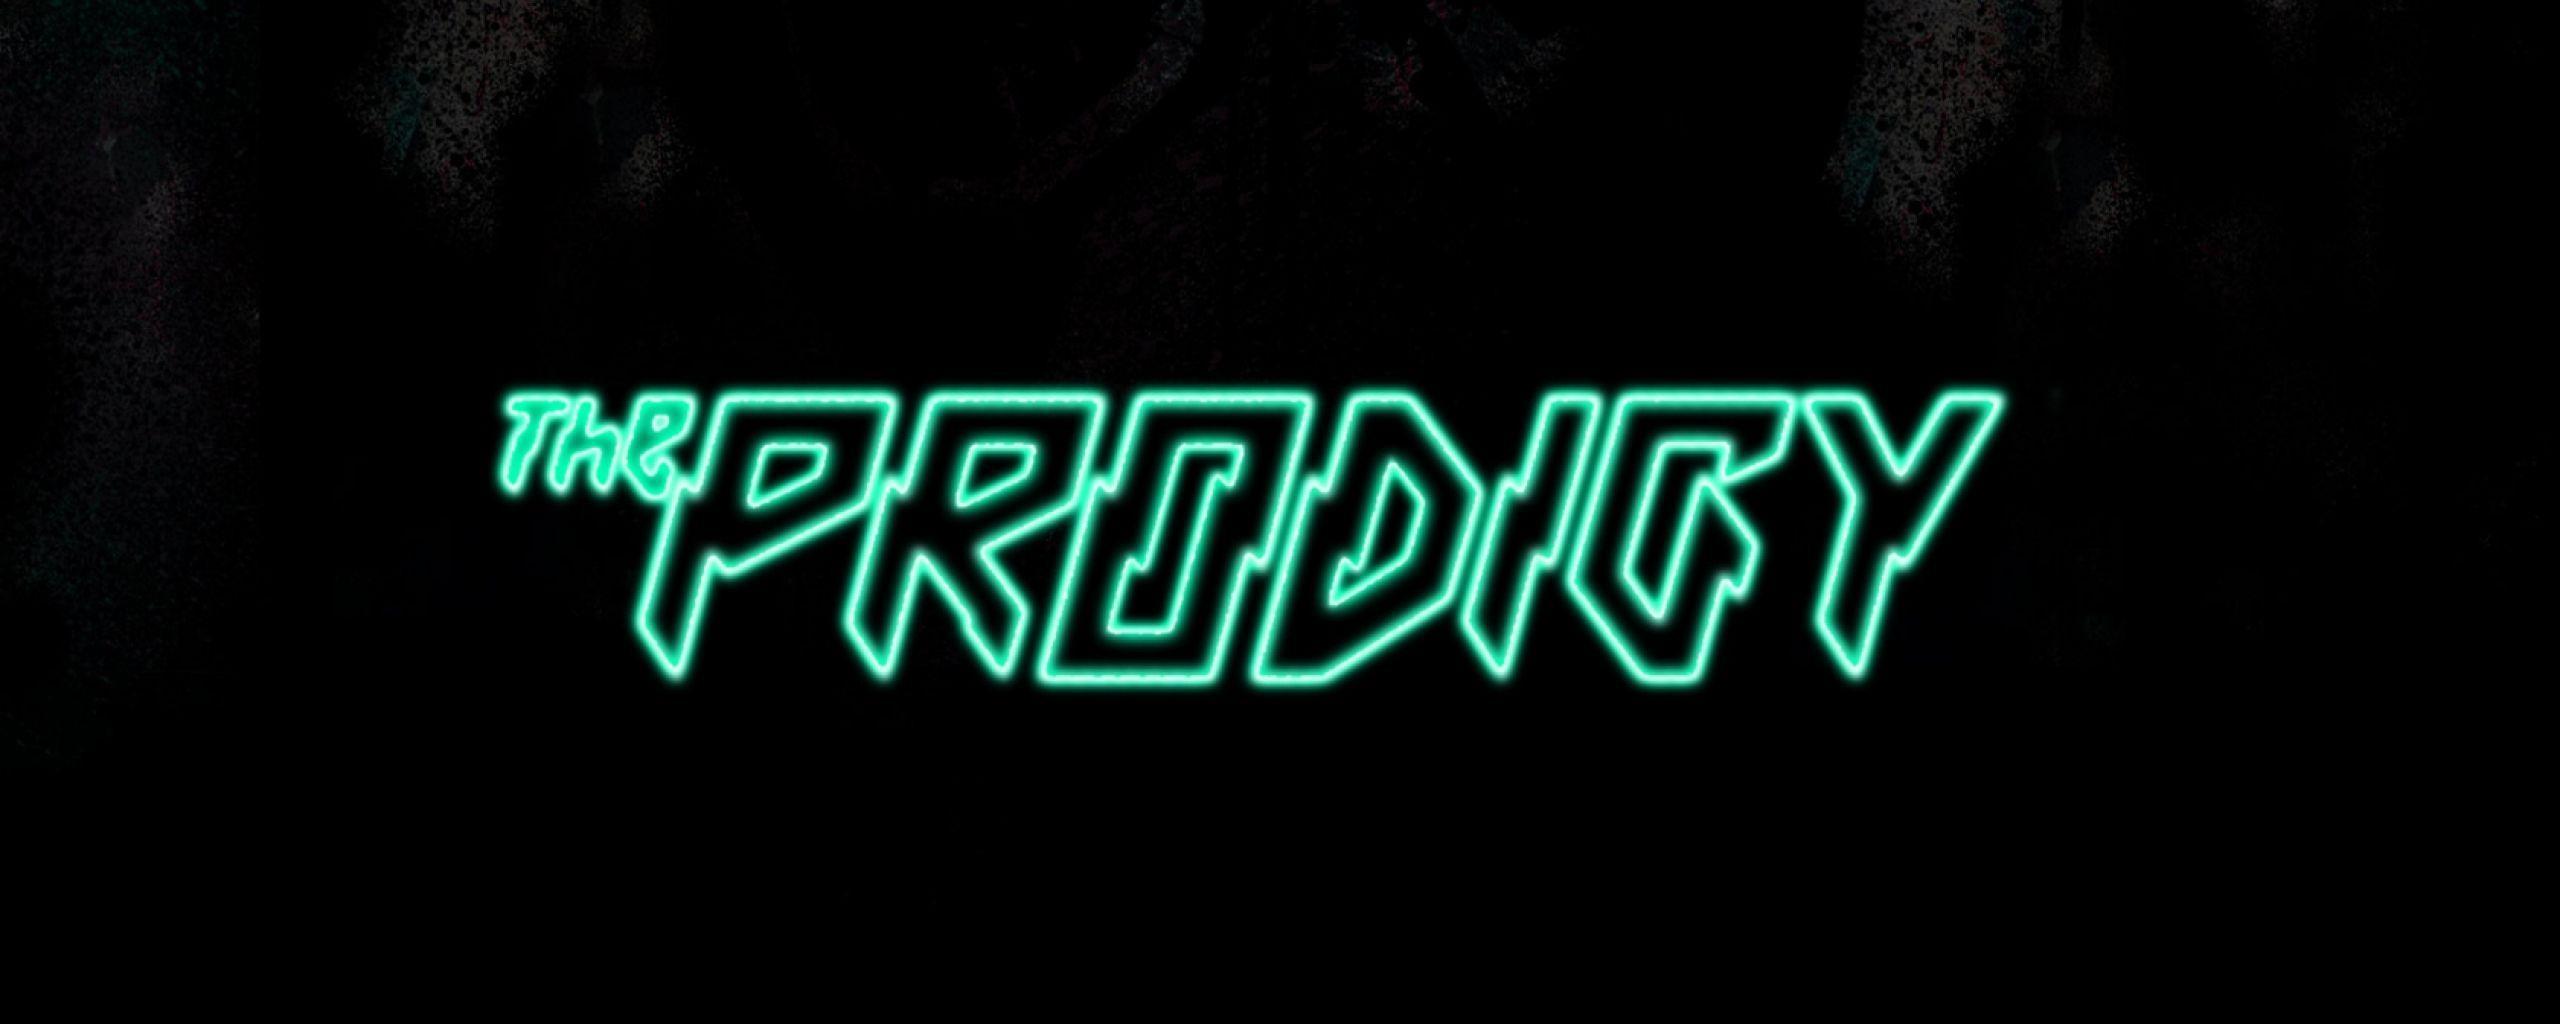 Download Prodigy Wallpaper Gallery